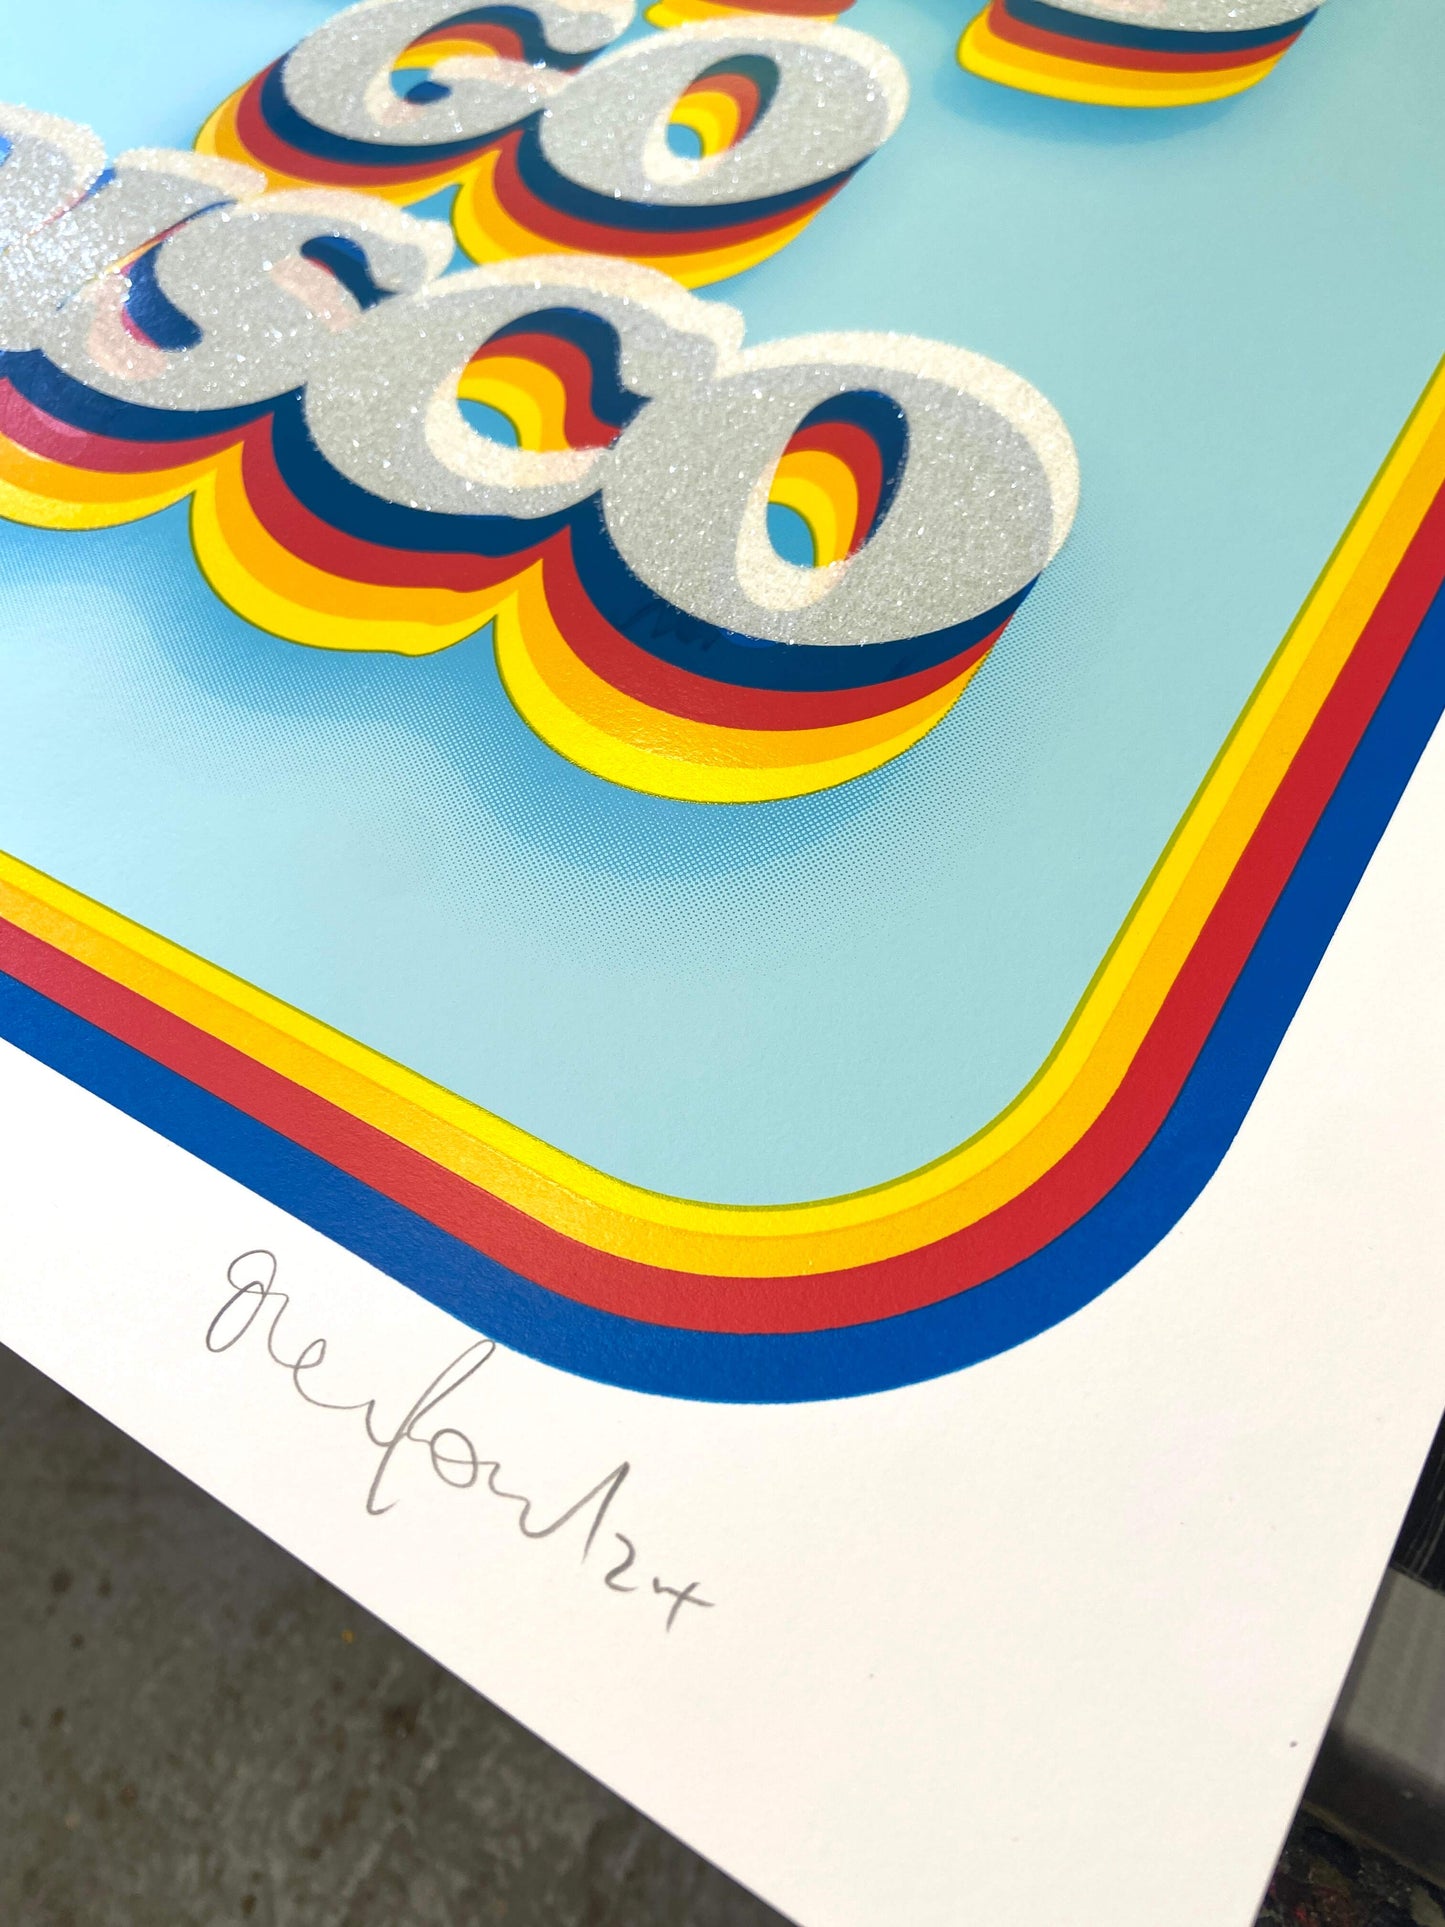 close up shot and signature of let's go disco 